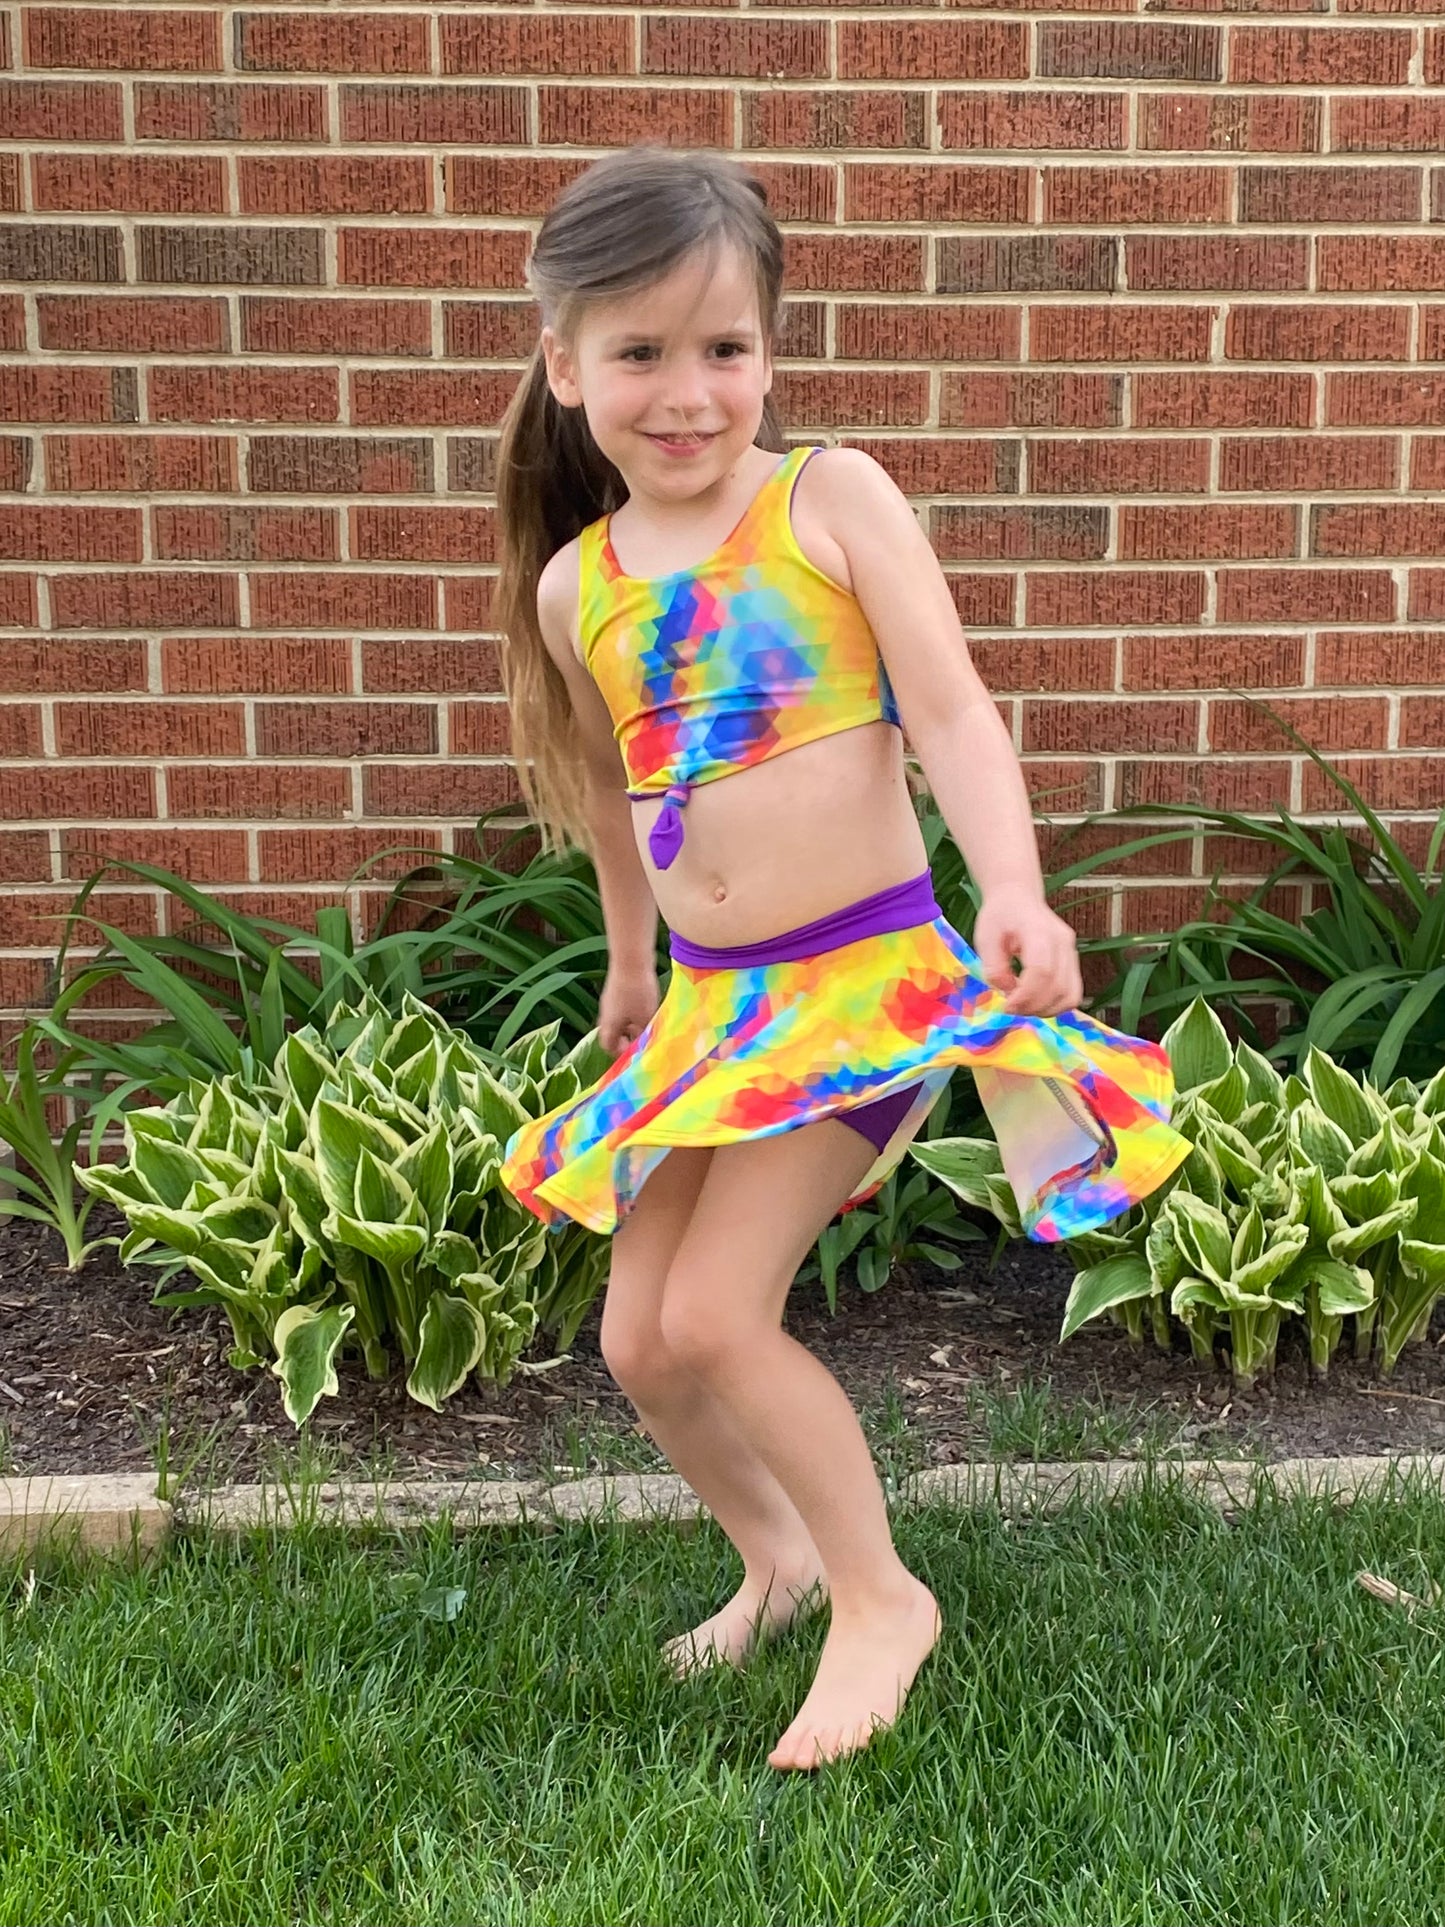 Kids Sporty Skorty Skirt, Shorts to full length yoga pants - Digital PDF Sewing Pattern - Size Preemie to 20 youth